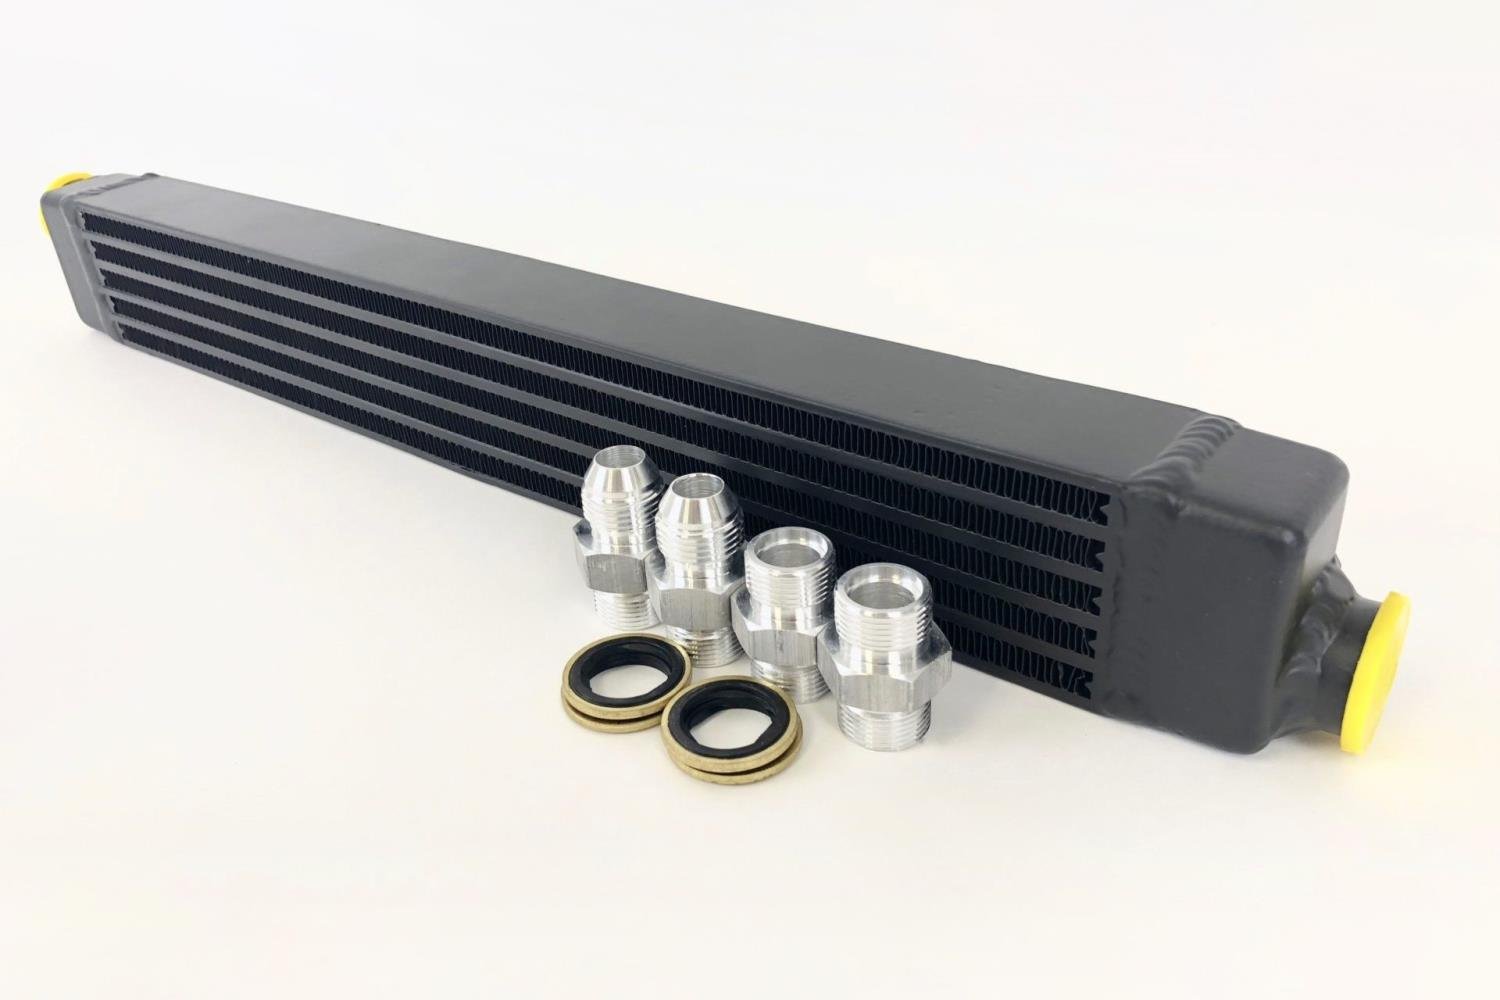 BMW E30 Oil Cooler w/ fittings for OEM style and AN-10 male connections